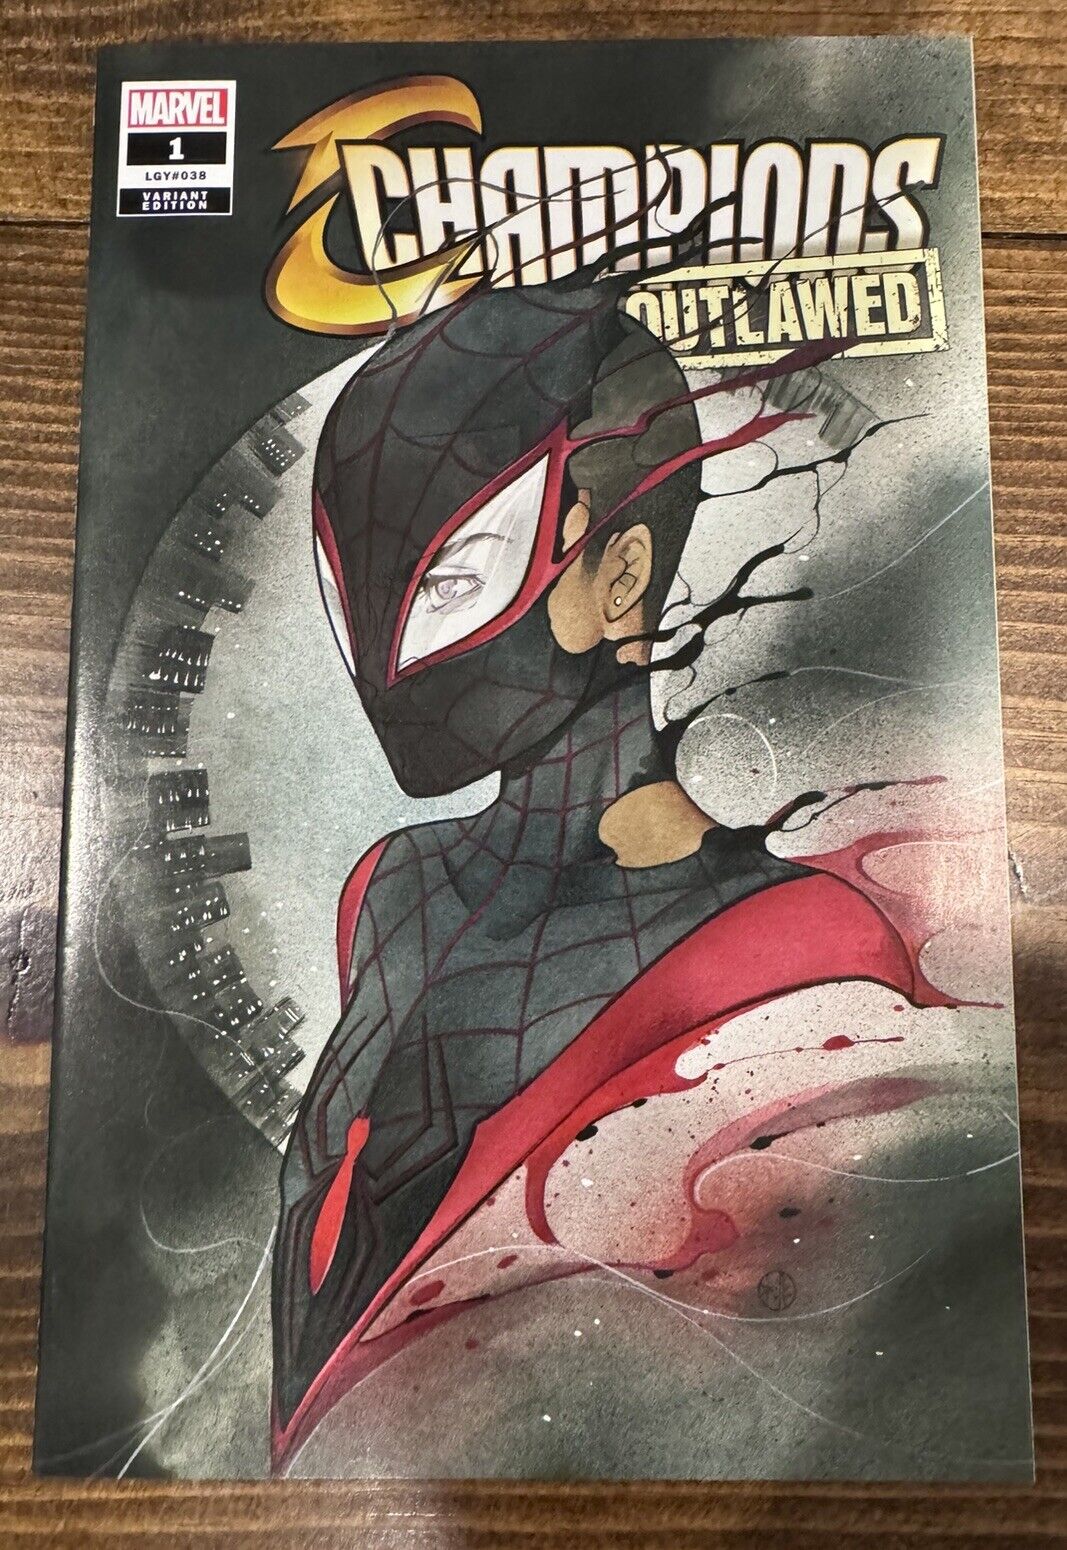 CHAMPIONS OUTLAWED 1 (2020) MILES MORALES PEACH MOMOKO VARIANT COVER LGY #38